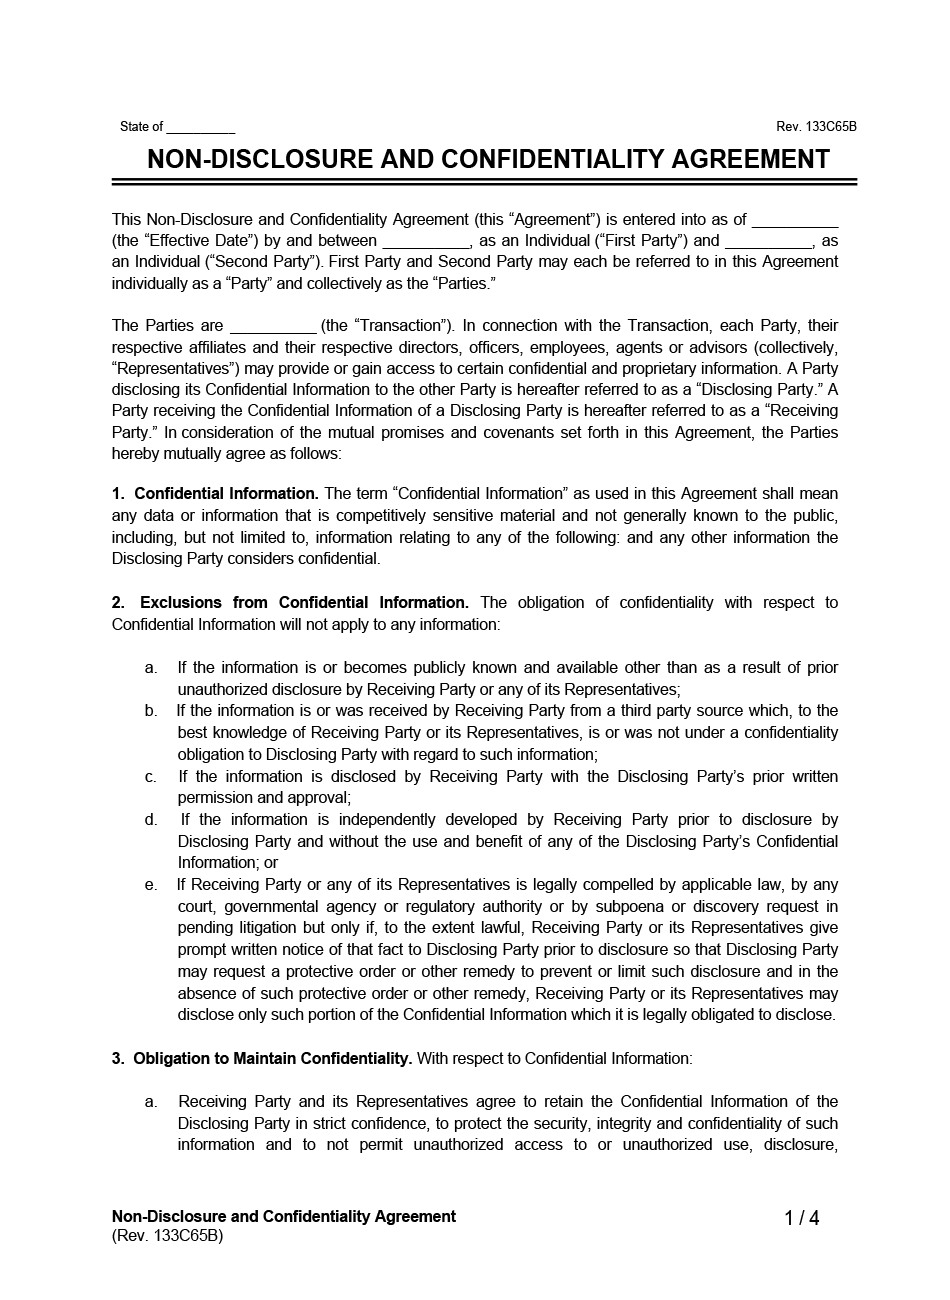 Non Disclosure Agreement example form